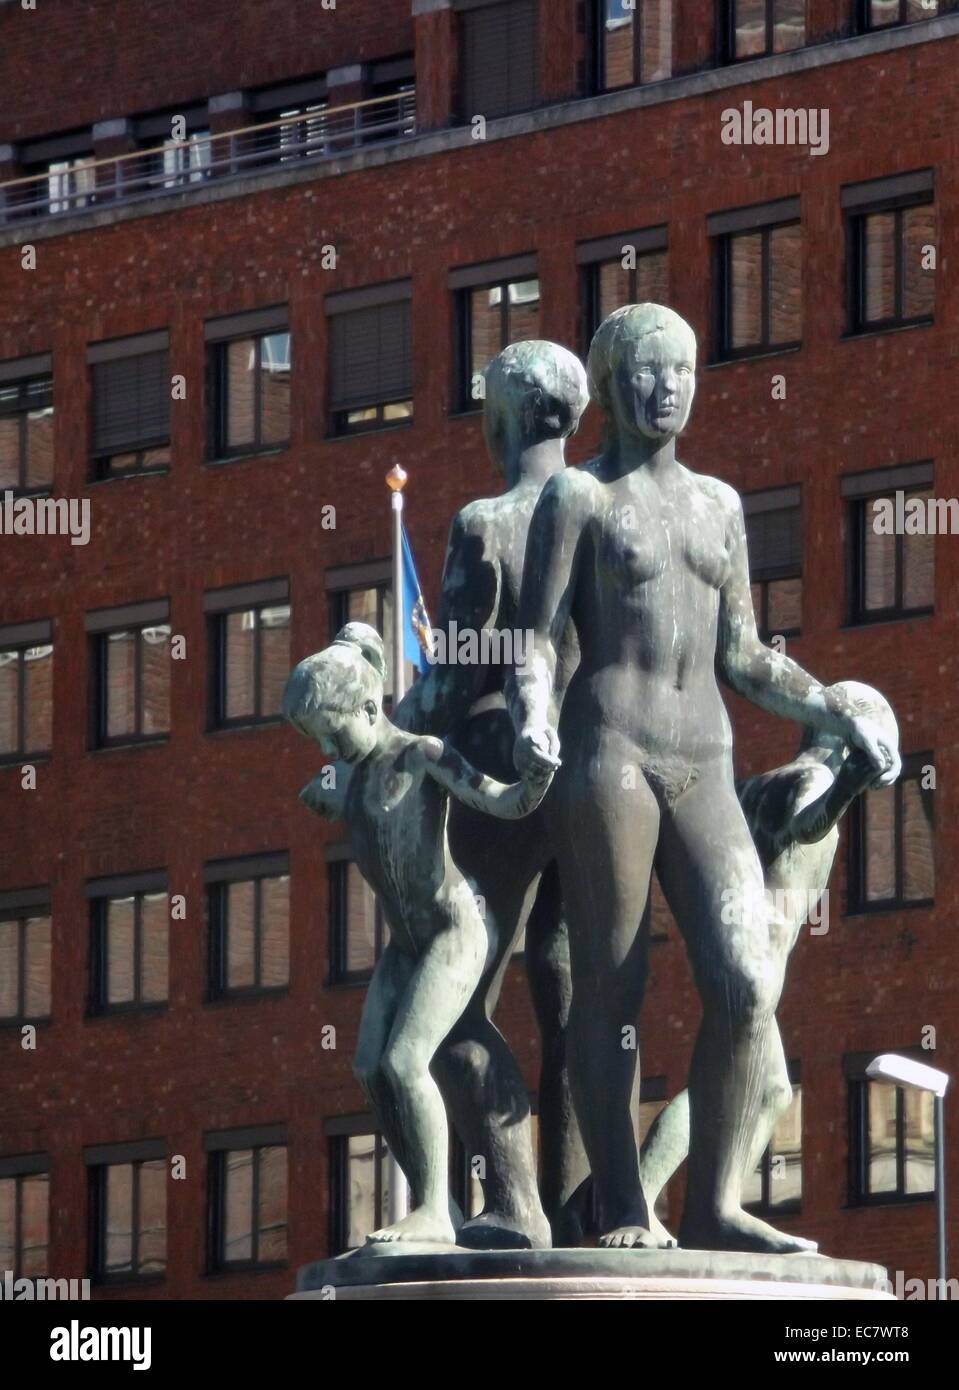 Sculpture of a family group, Oslo, Town Hall, Norway. 2013 Stock Photo